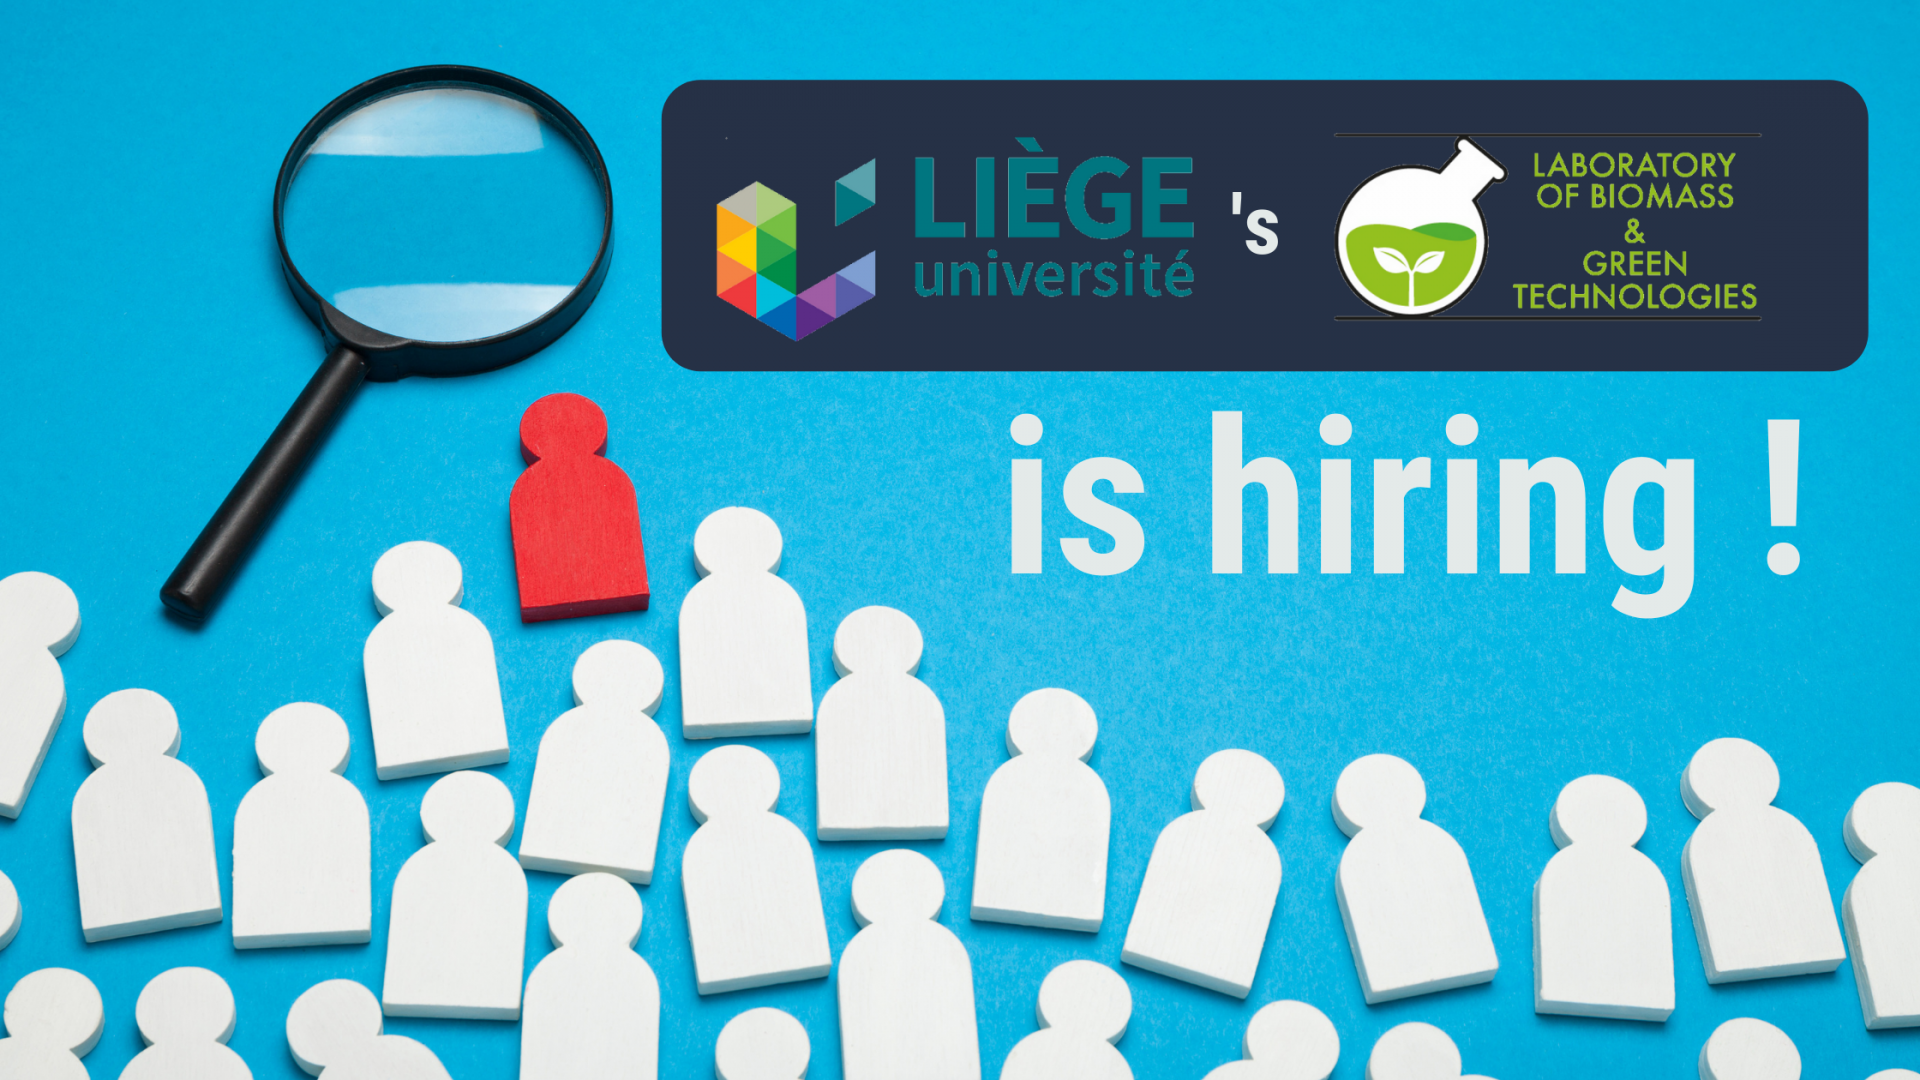 The University of Liège's Laboratory of Biomass & Green Technologies is hiring for 2 positions